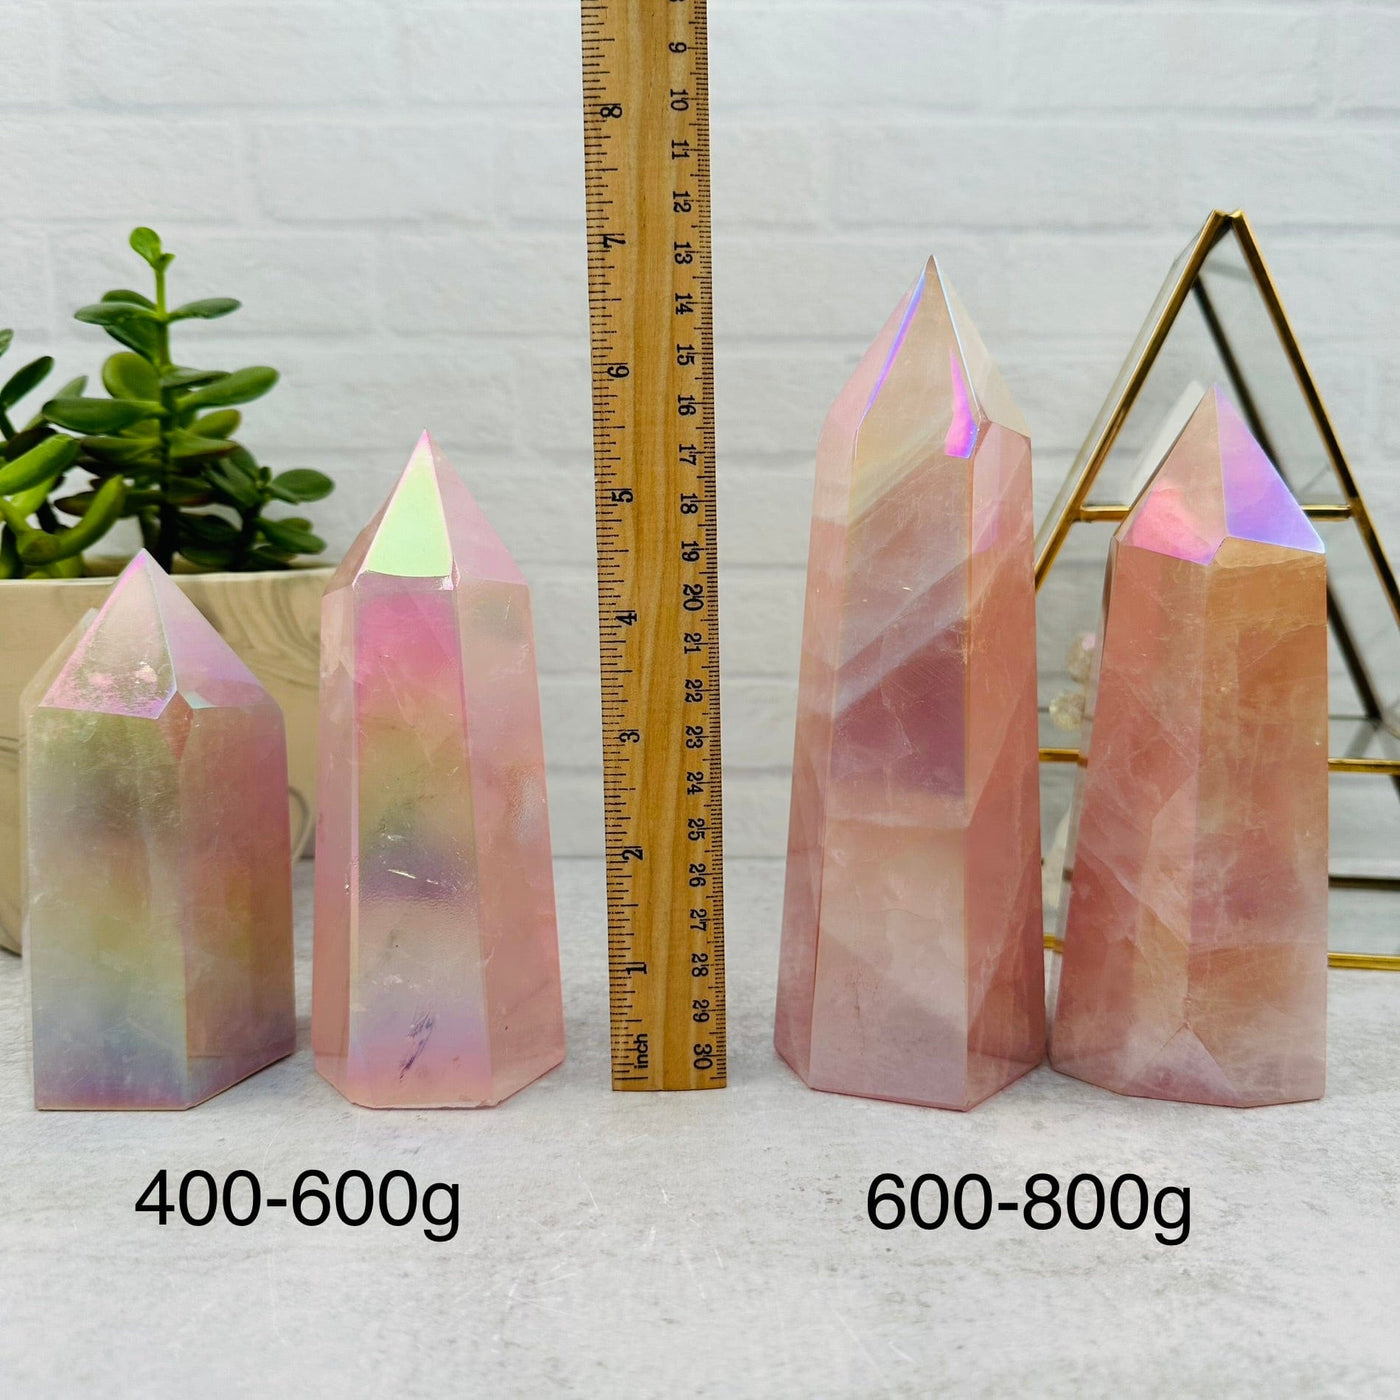 Angel Aura Rose Quartz Polished Tower - By Weight - next to a ruler for size reference 